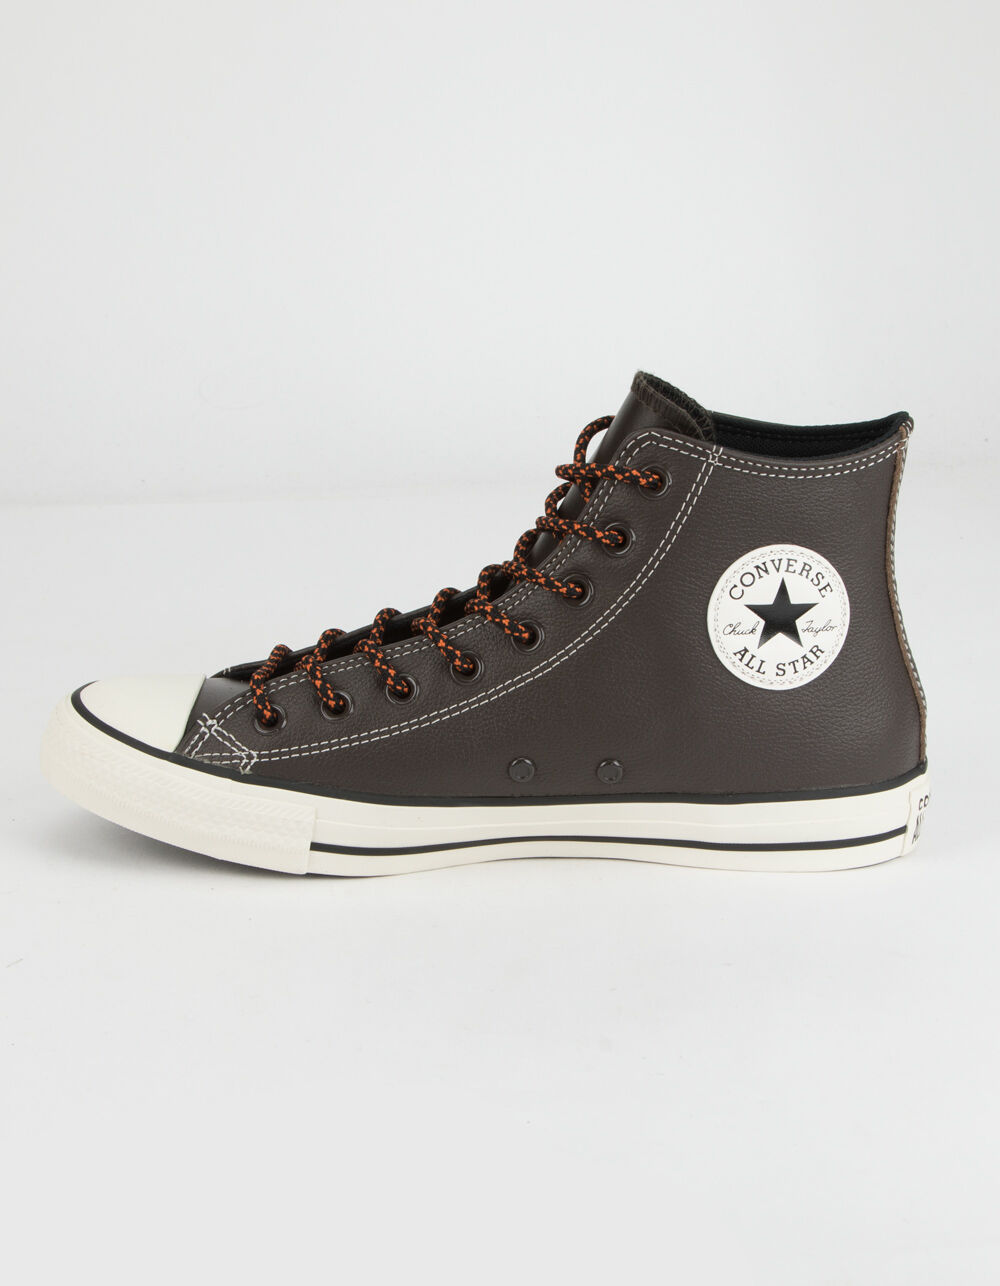 CONVERSE Tumbled Leather Chuck Taylor All Star High Top Shoes - BROWN ...